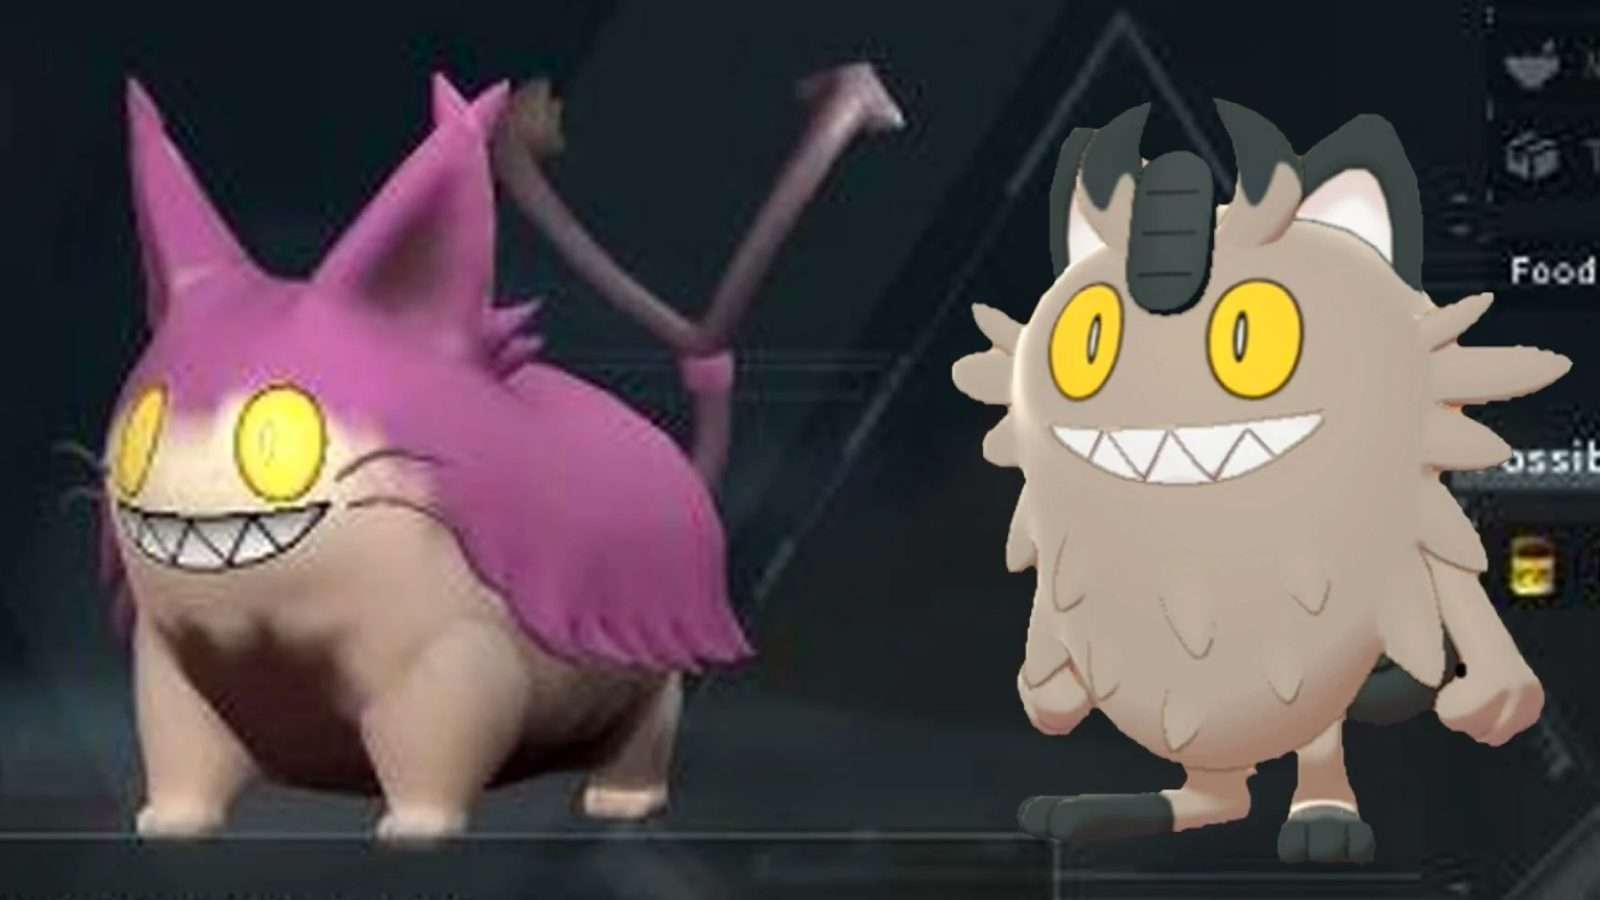 Palworld Pal side-by-side comparison with Galarian Meowth from Pokemon.